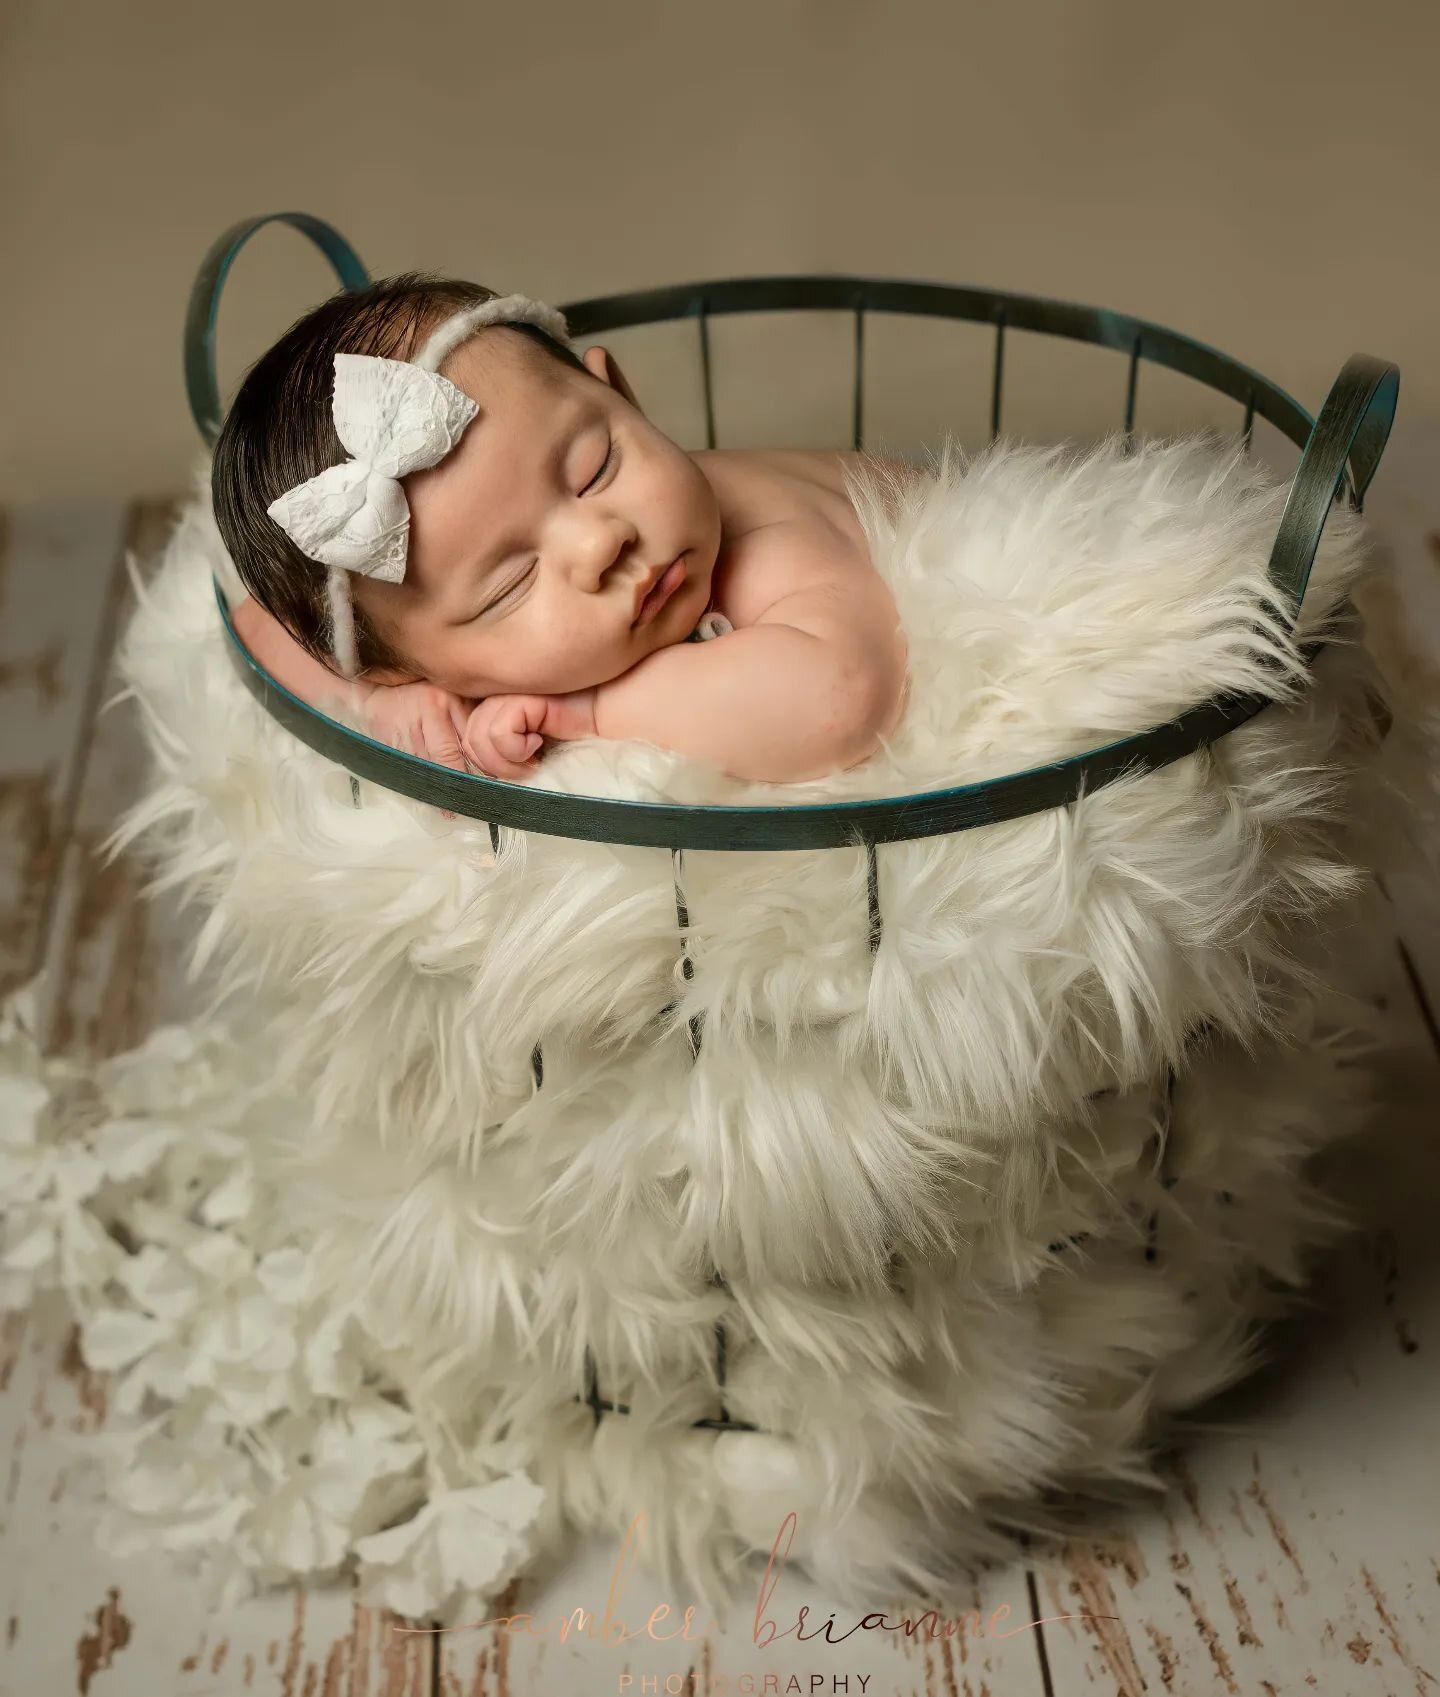 Baby Marcella traveled an hour just for her photoshoot! How beautiful is she?